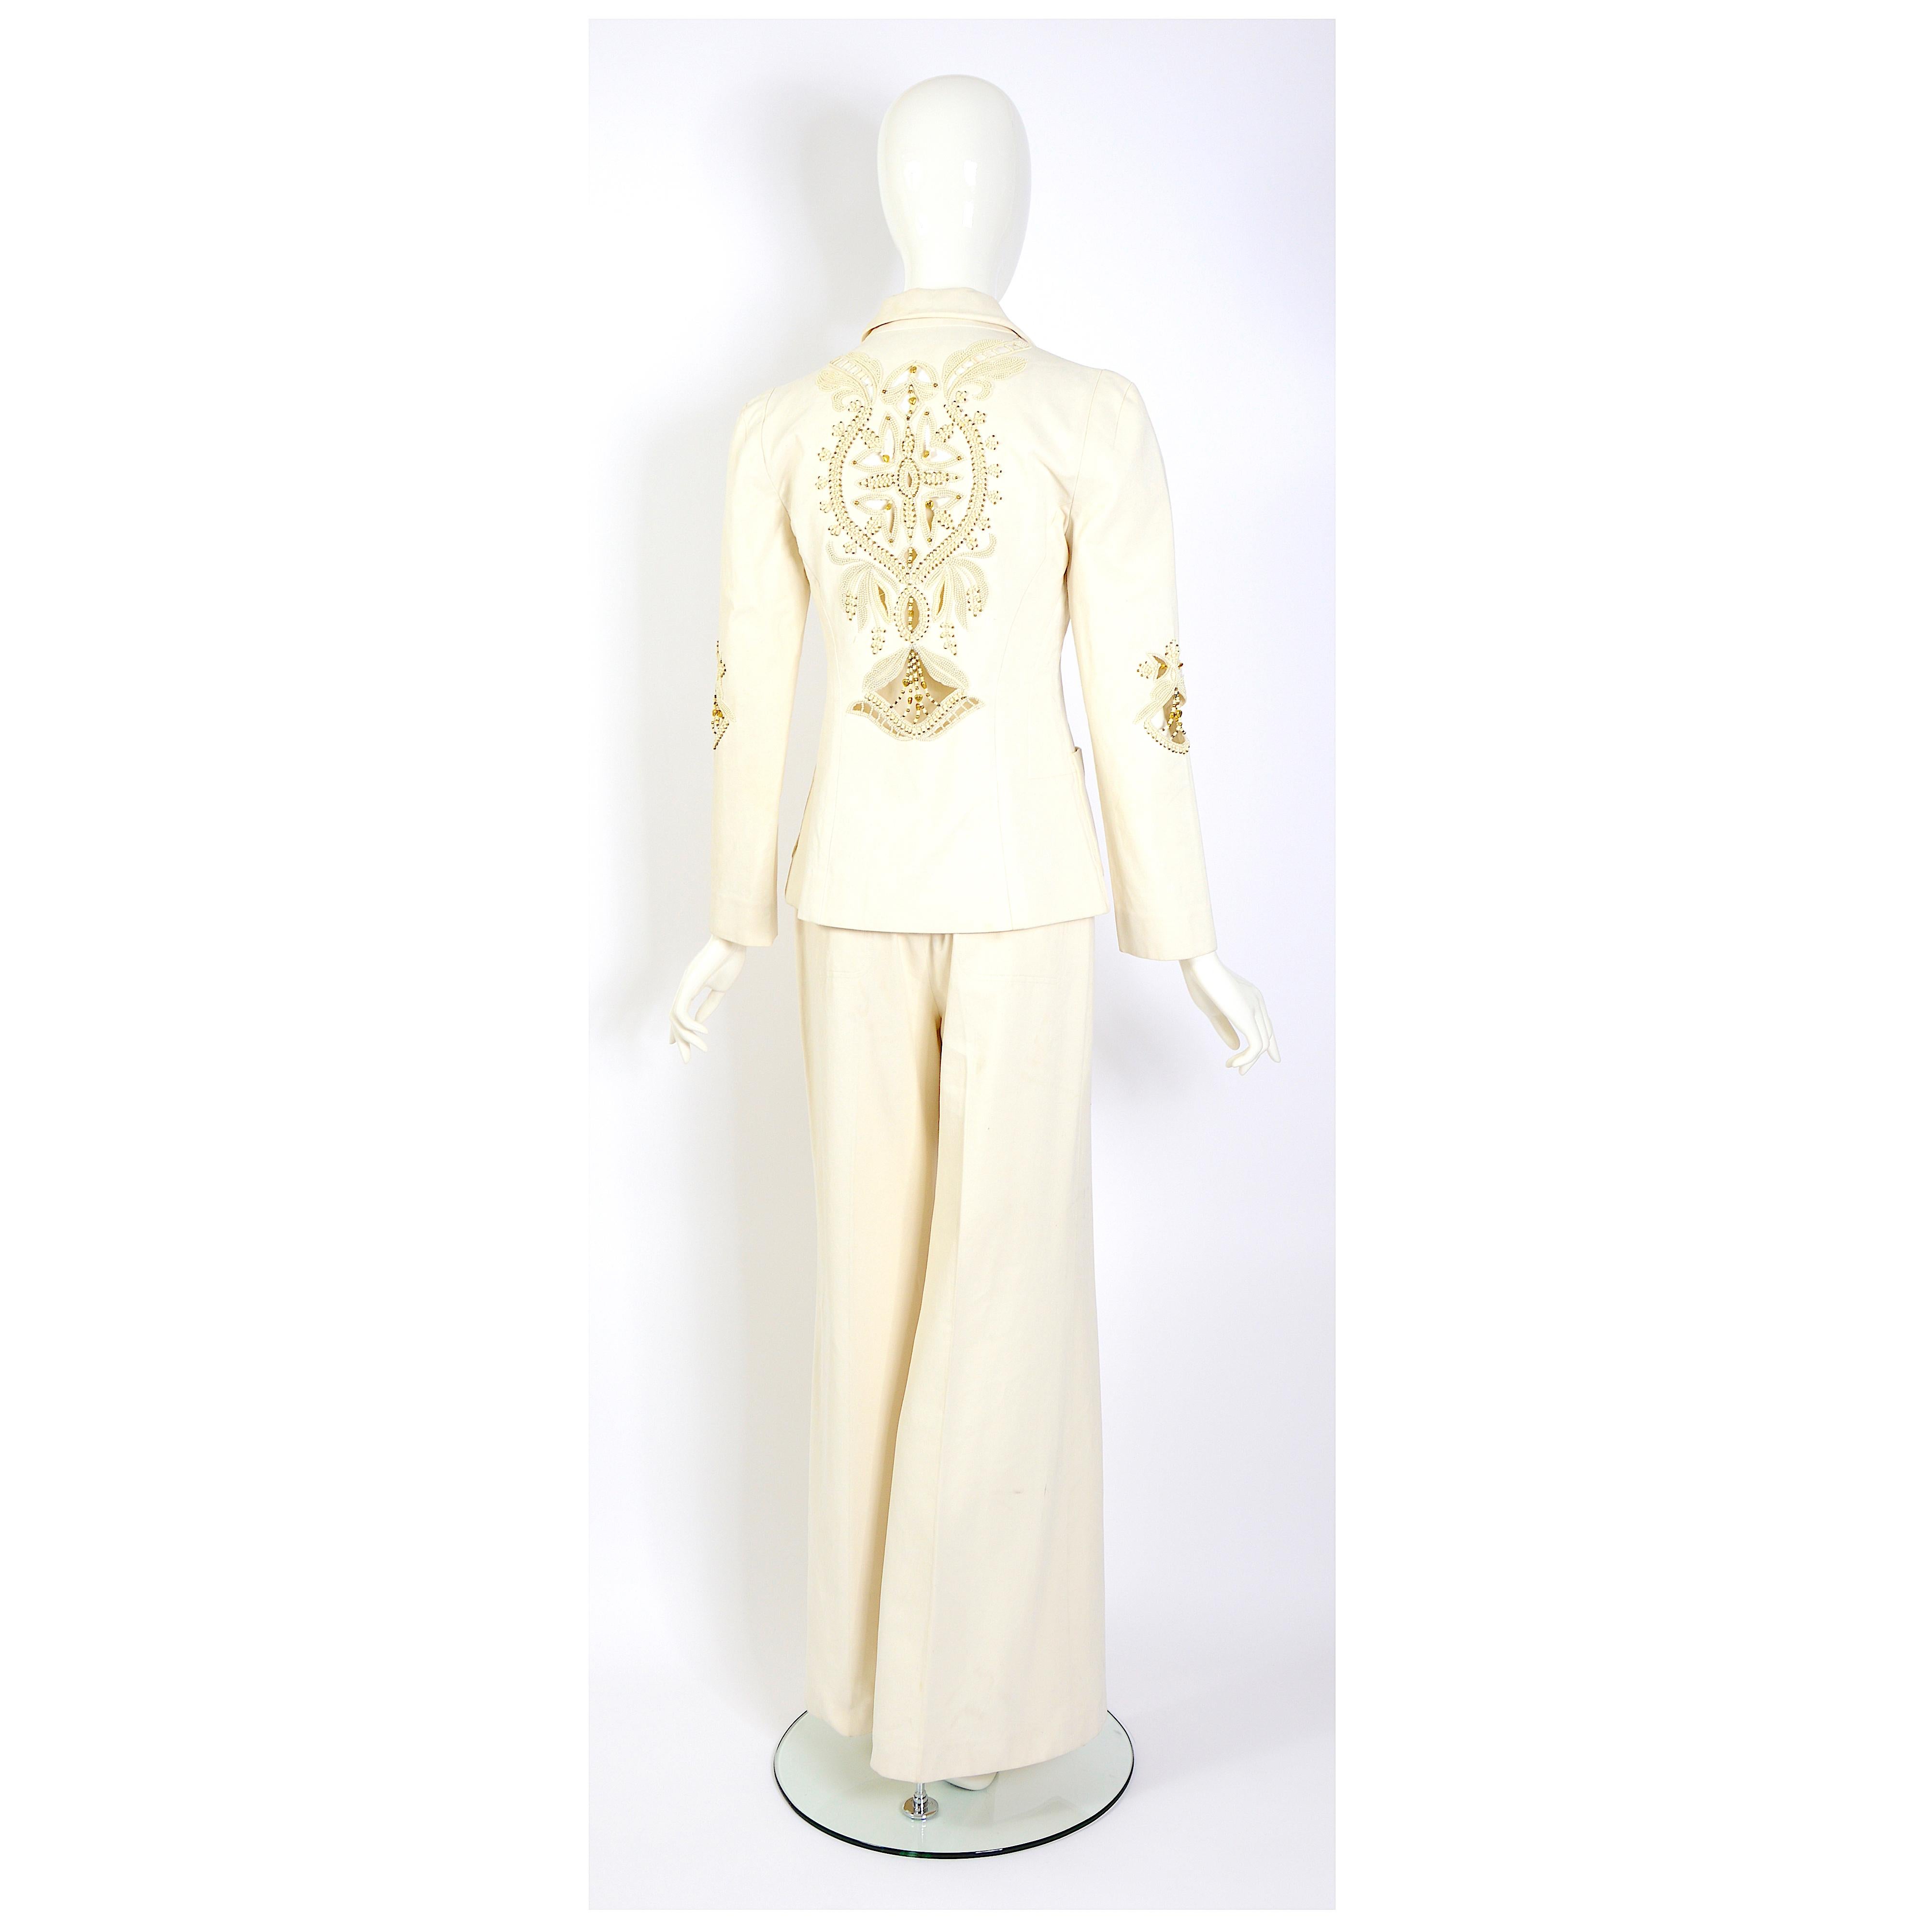 Timeless elegance with this stunning vintage Chloé by Phoebe Philo suit from spring/summer 2002. Crafted in a chic cream color, this suit features a beautifully embellished back and sleeves, adorned with exquisite pearls and charming hearts.
Don't